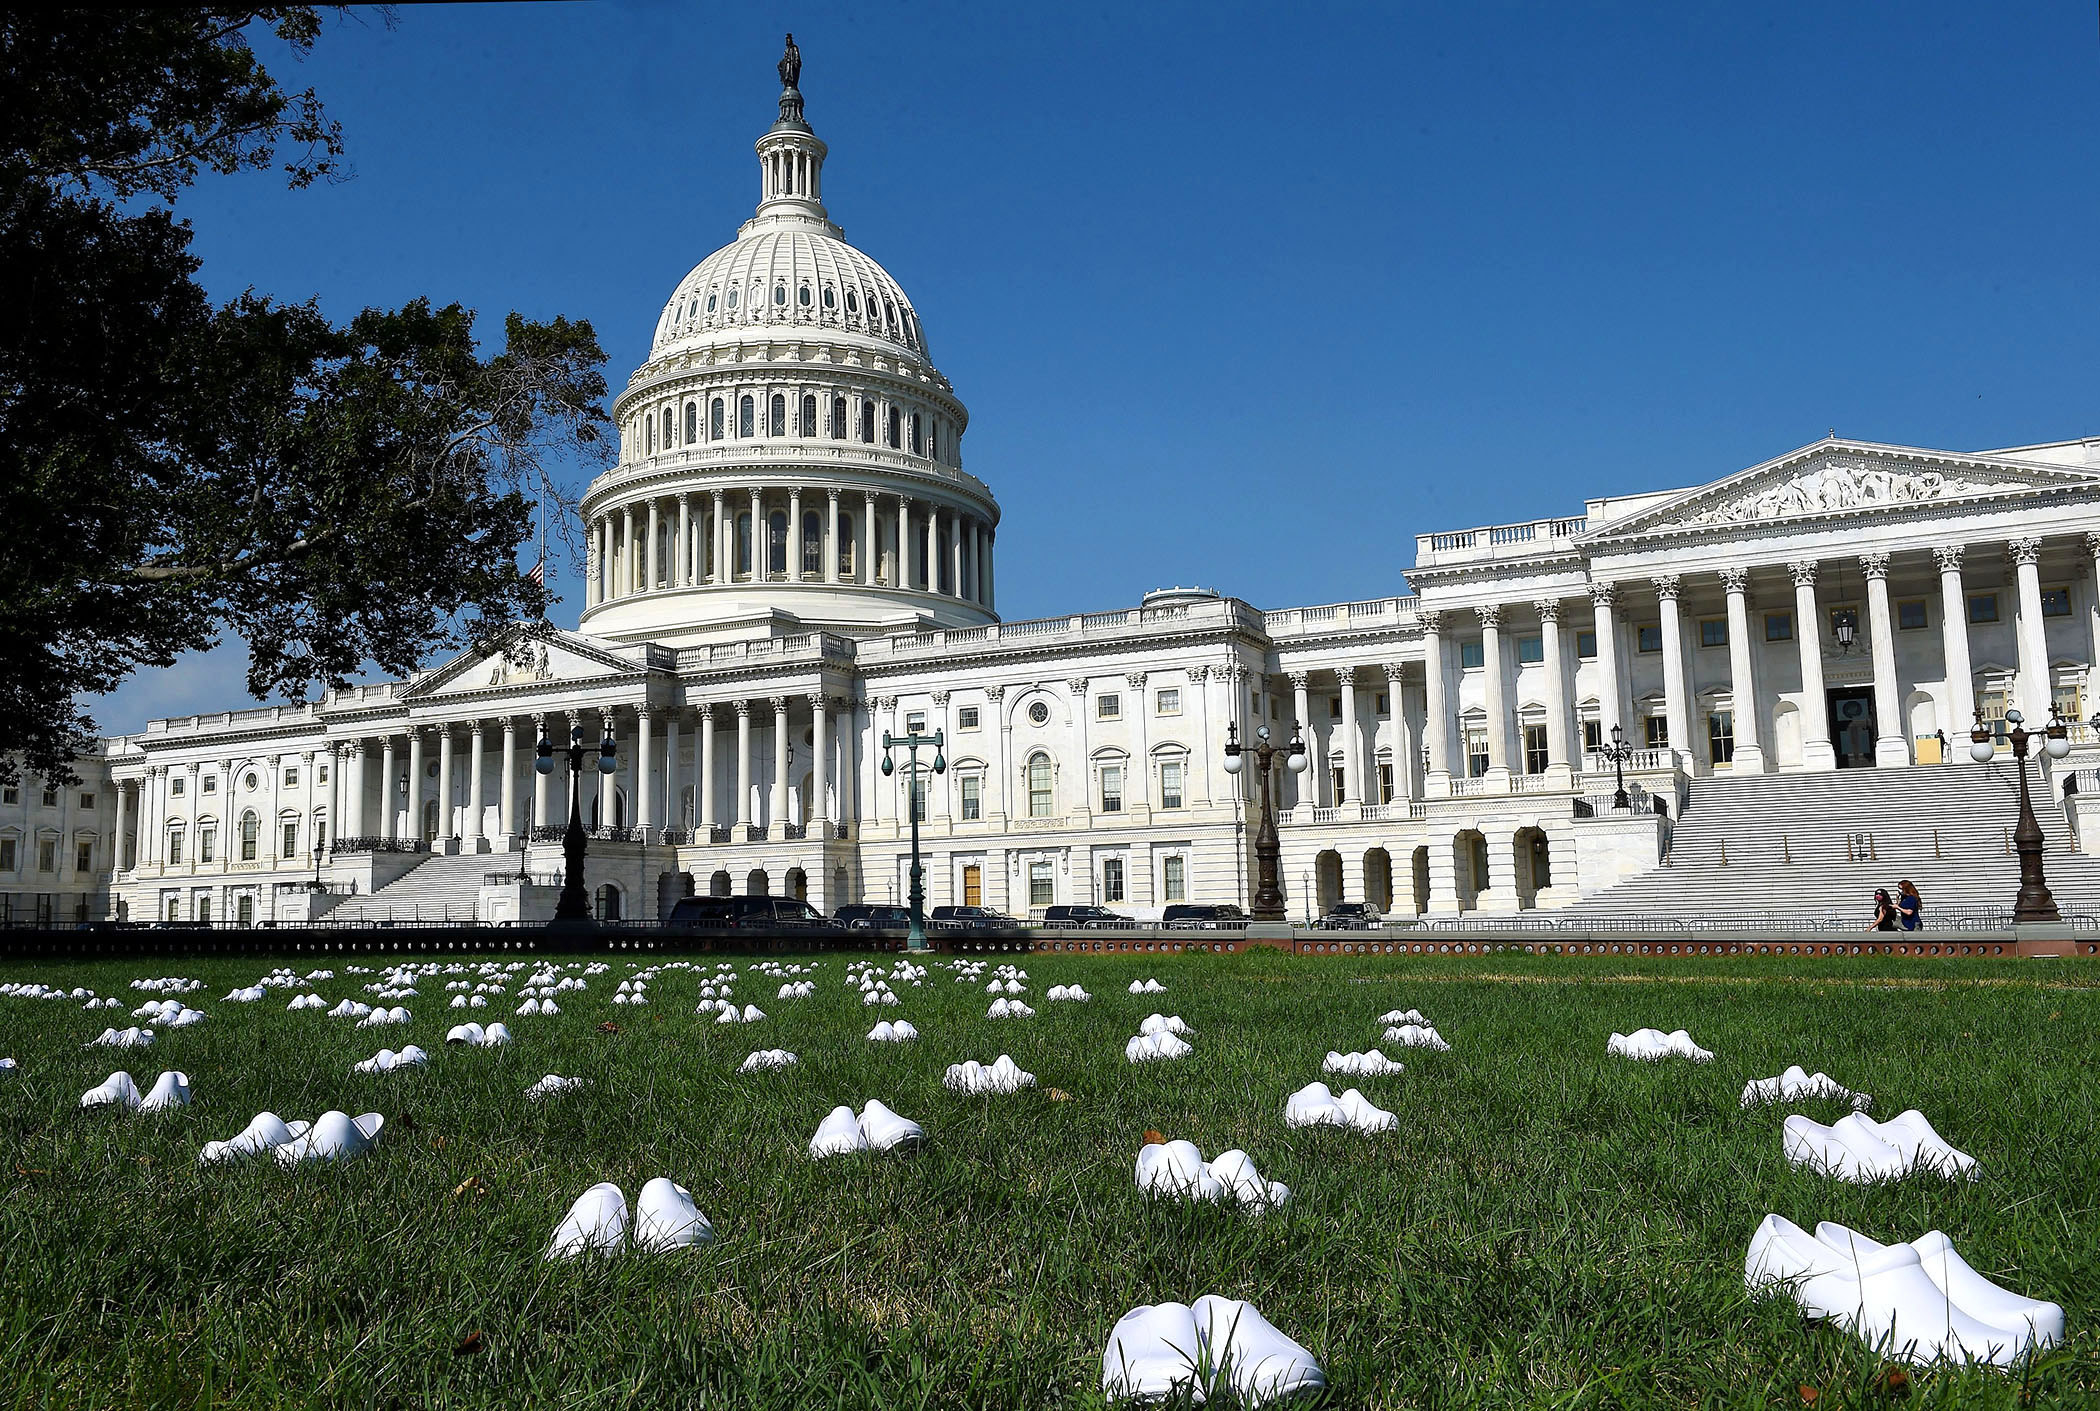 Several pairs of white clogs sit on the lawn outside the US Capitol building